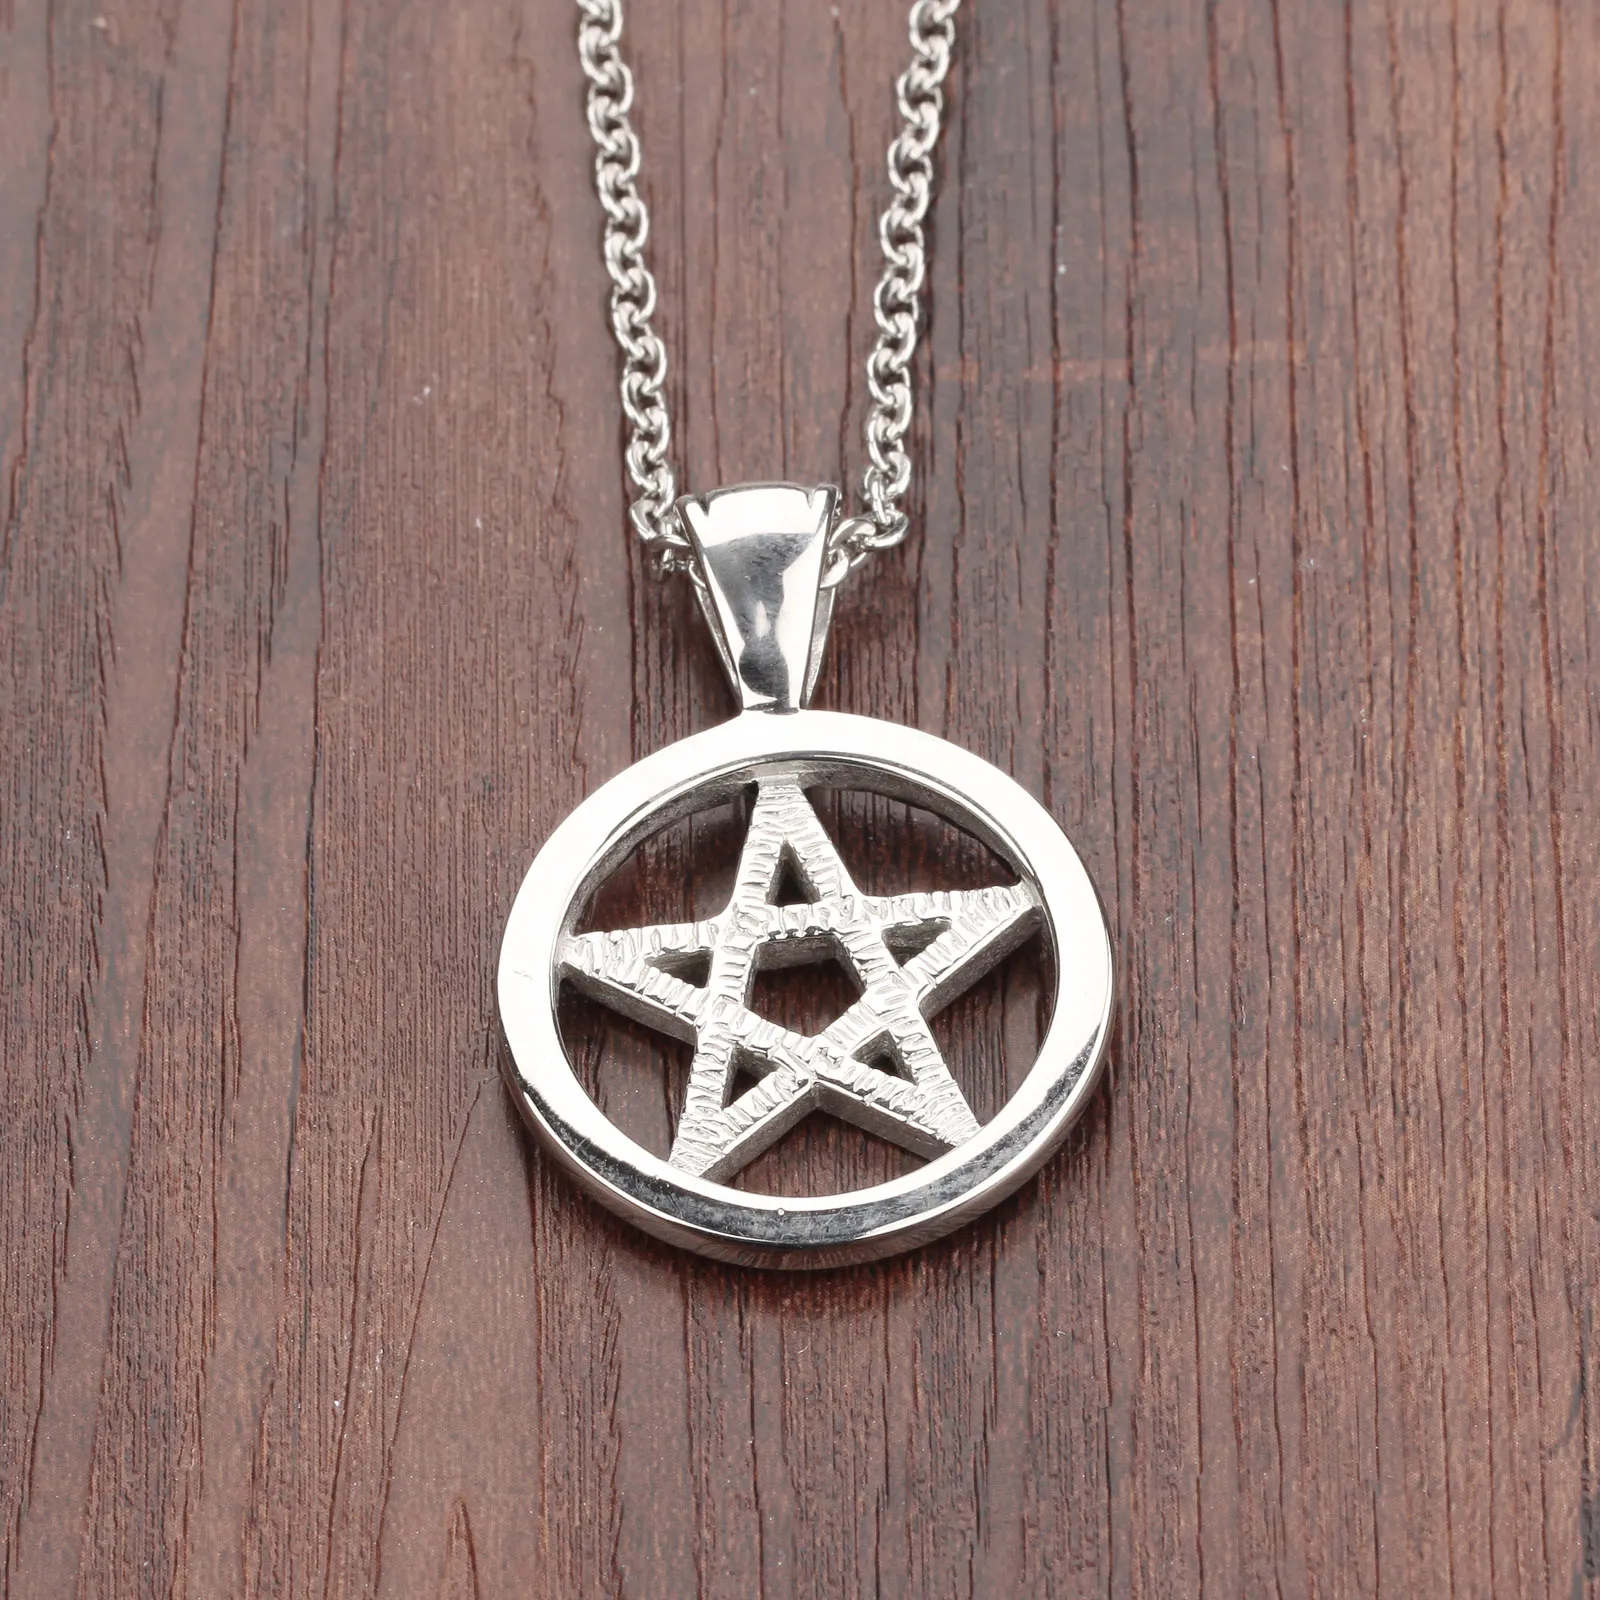 Cool Gift Casting 316L Stainless Steel pentagram satanic symbol Satan worship Pendant Necklace with Chain